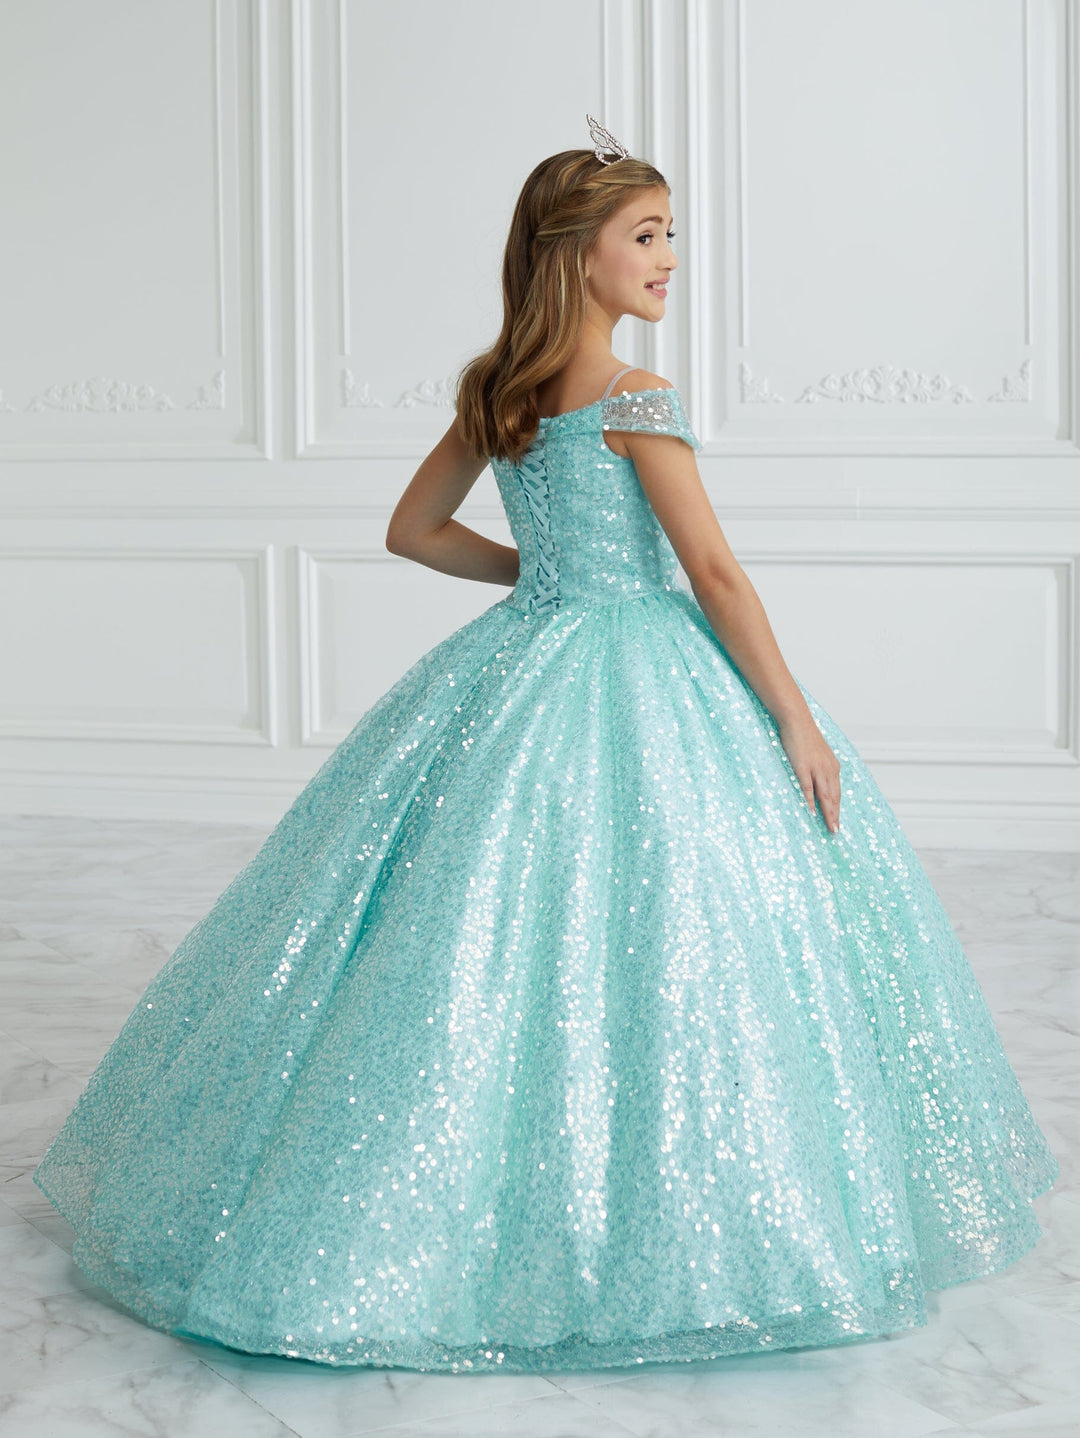 Girls Sequin Cold Shoulder Gown by Tiffany Princess 13679